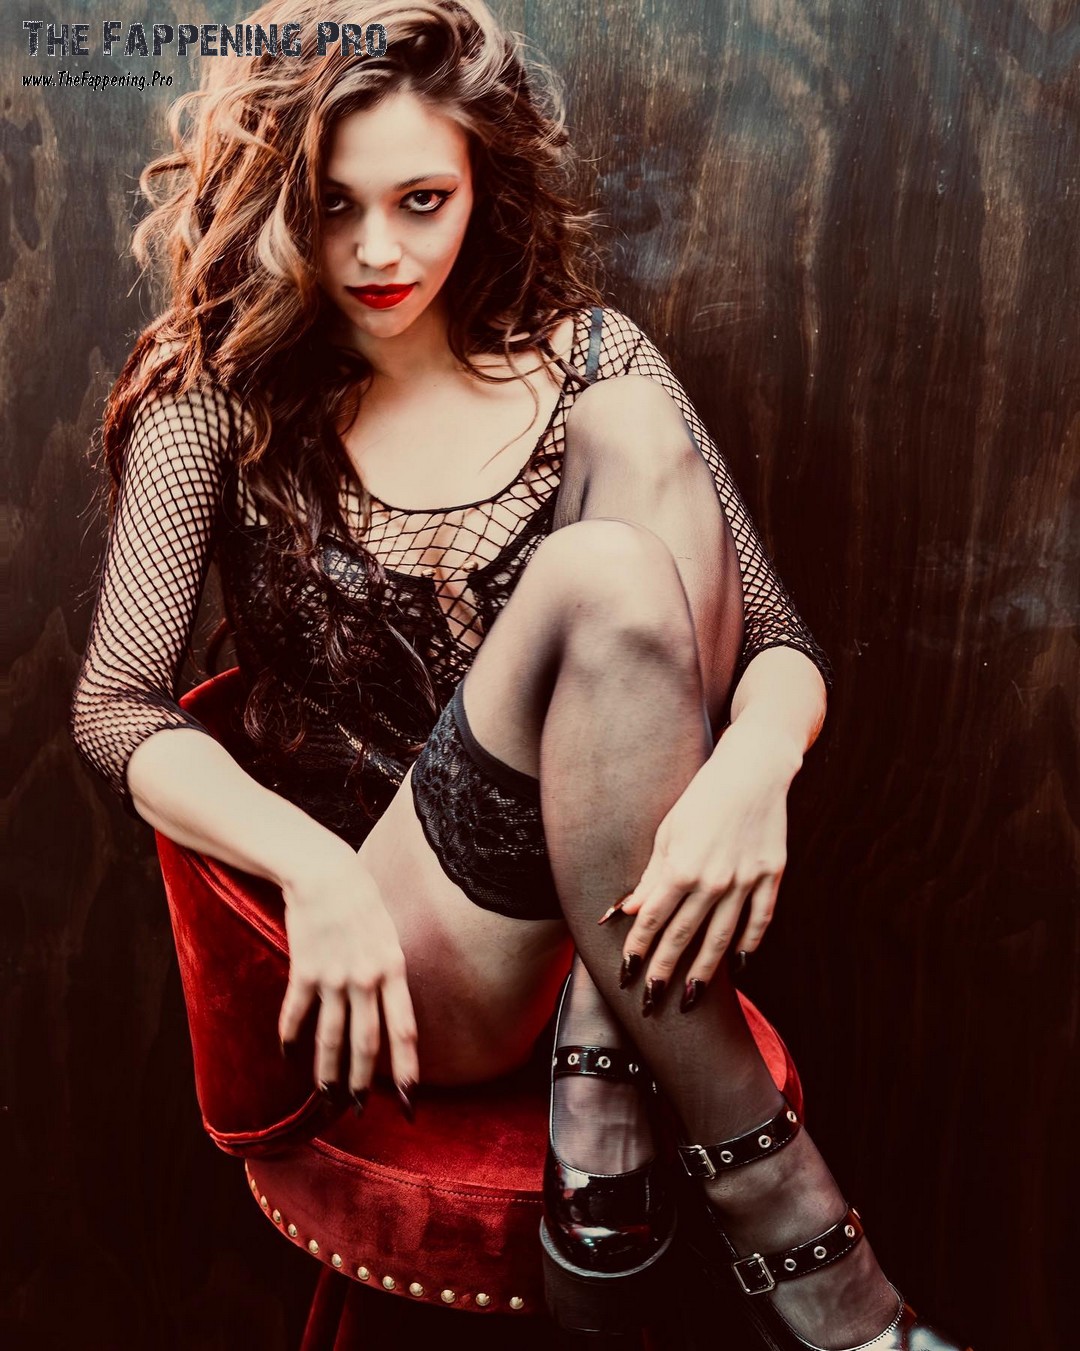 Get ready to be mesmerized by the stunning photos of actress India Eisley in sexy stockings! Captured by photographer Corey Castellano, these new images showcase the 30-year-old star in a seductive outfit, highlighting her alluring legs in black leather stockings. Known for her roles in popular TV series and movies, India Joy Eisley continues to captivate audiences with her undeniable charm and beauty. Don't miss out on this tantalizing glimpse into the world of a Hollywood sensation.